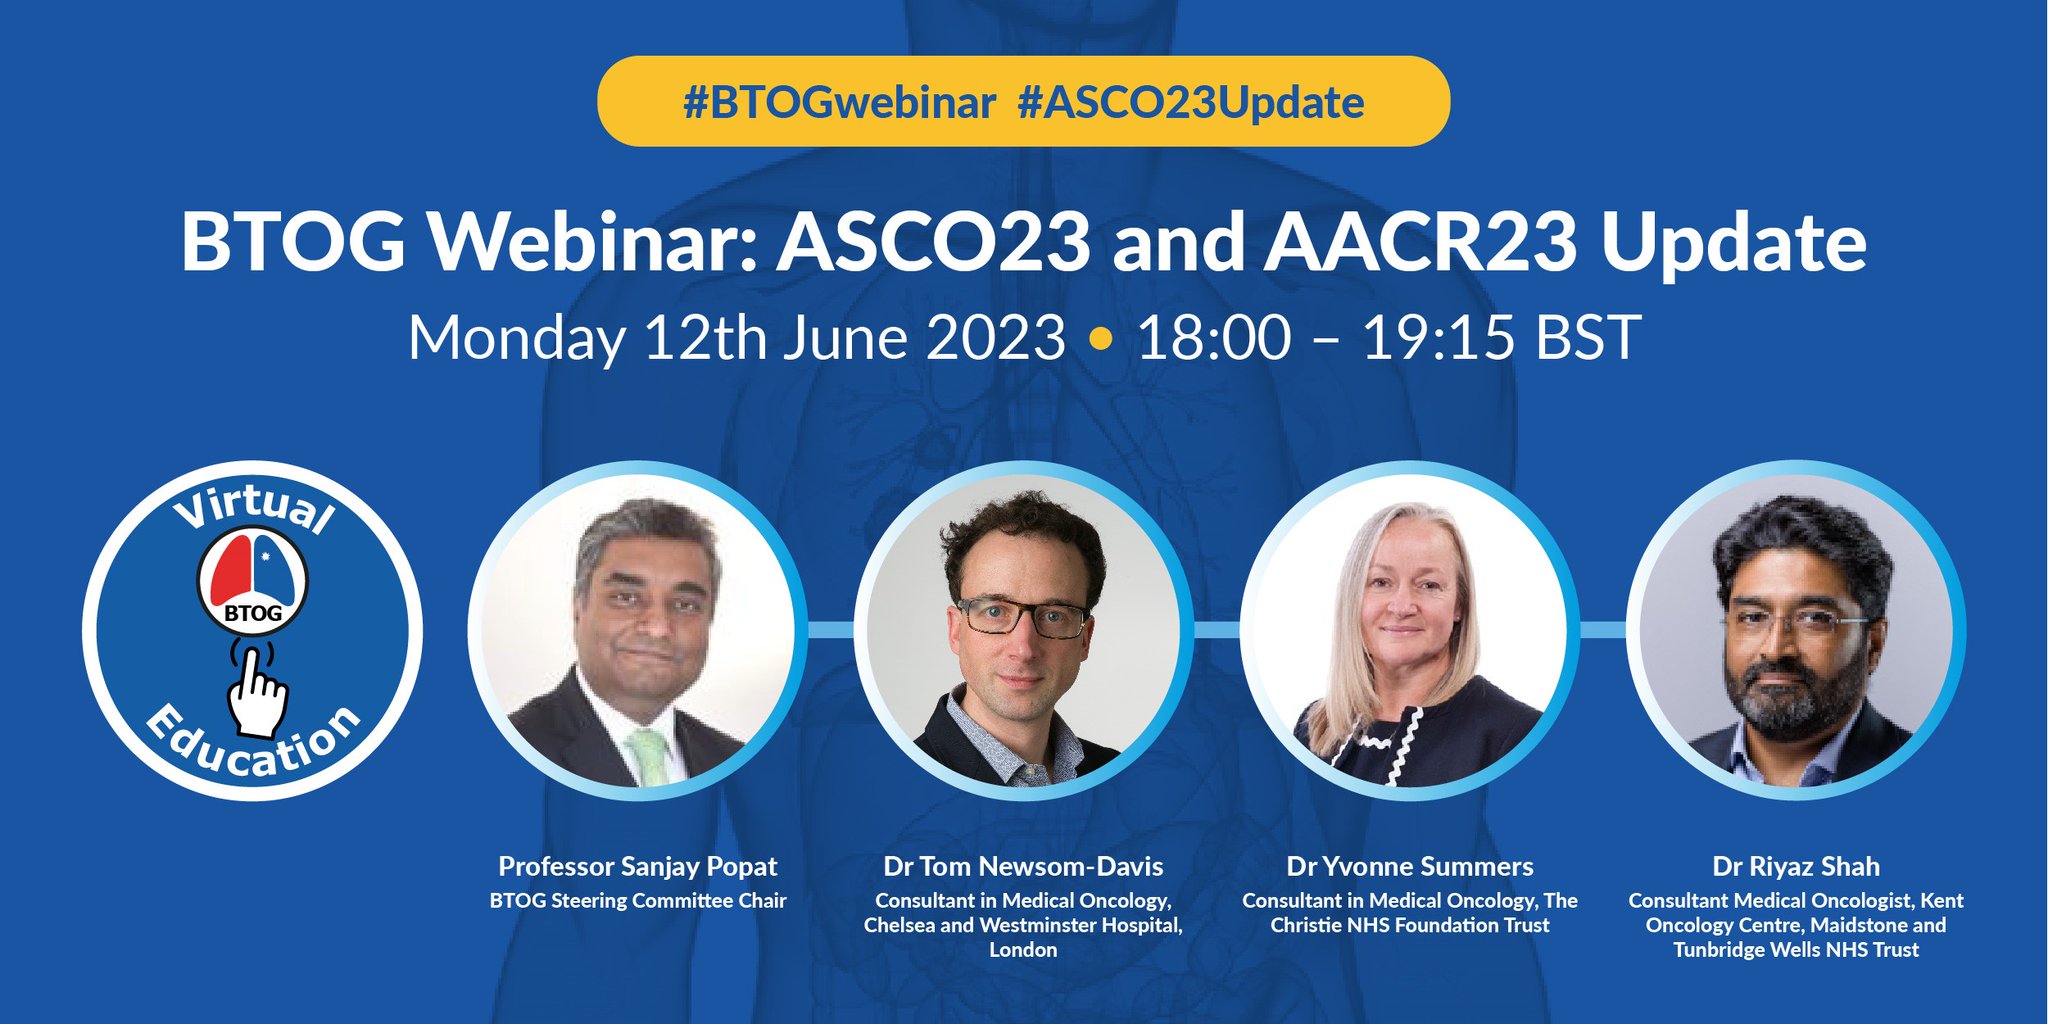 BTOG on Twitter "ASCO23 may be over but our ASCO23Update webinar on